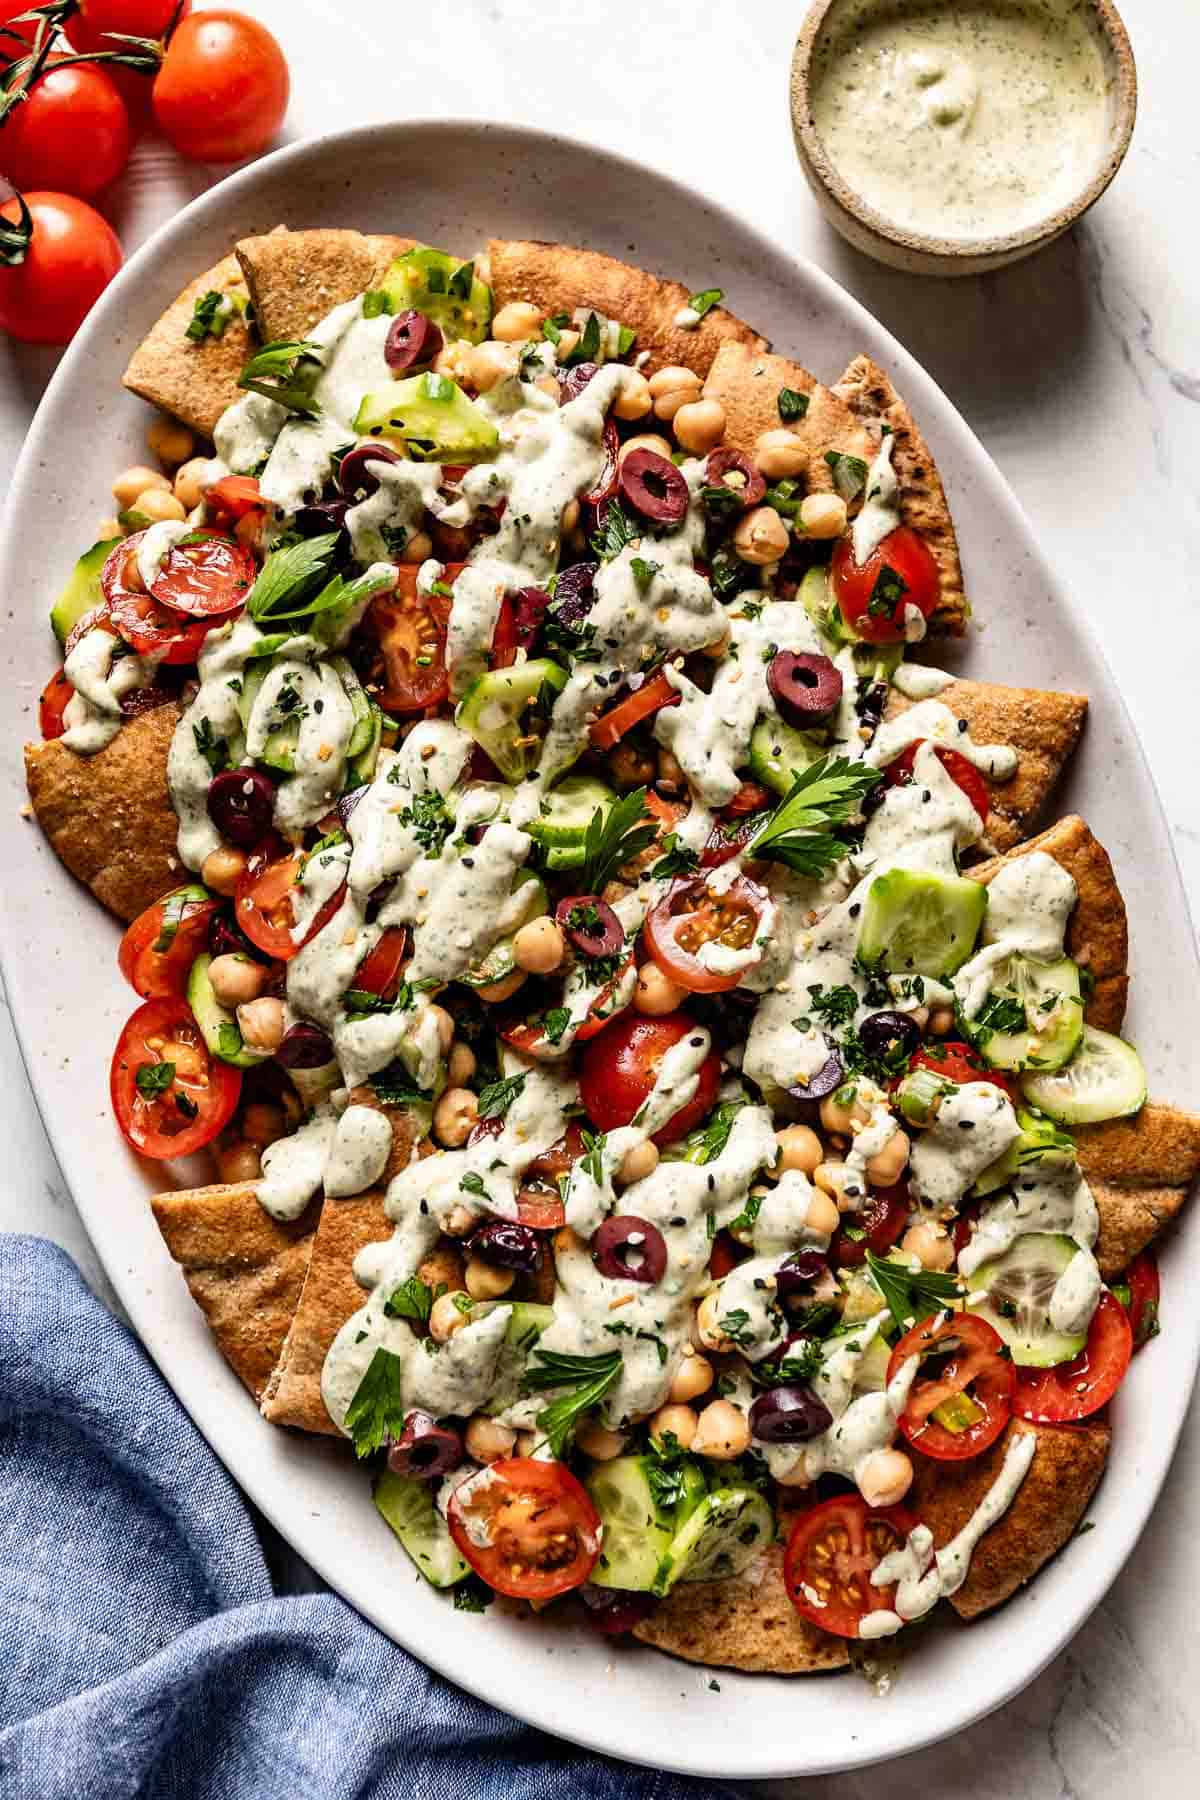 Vegan Turkish nachos drizzled with tahini dressing from the top view.